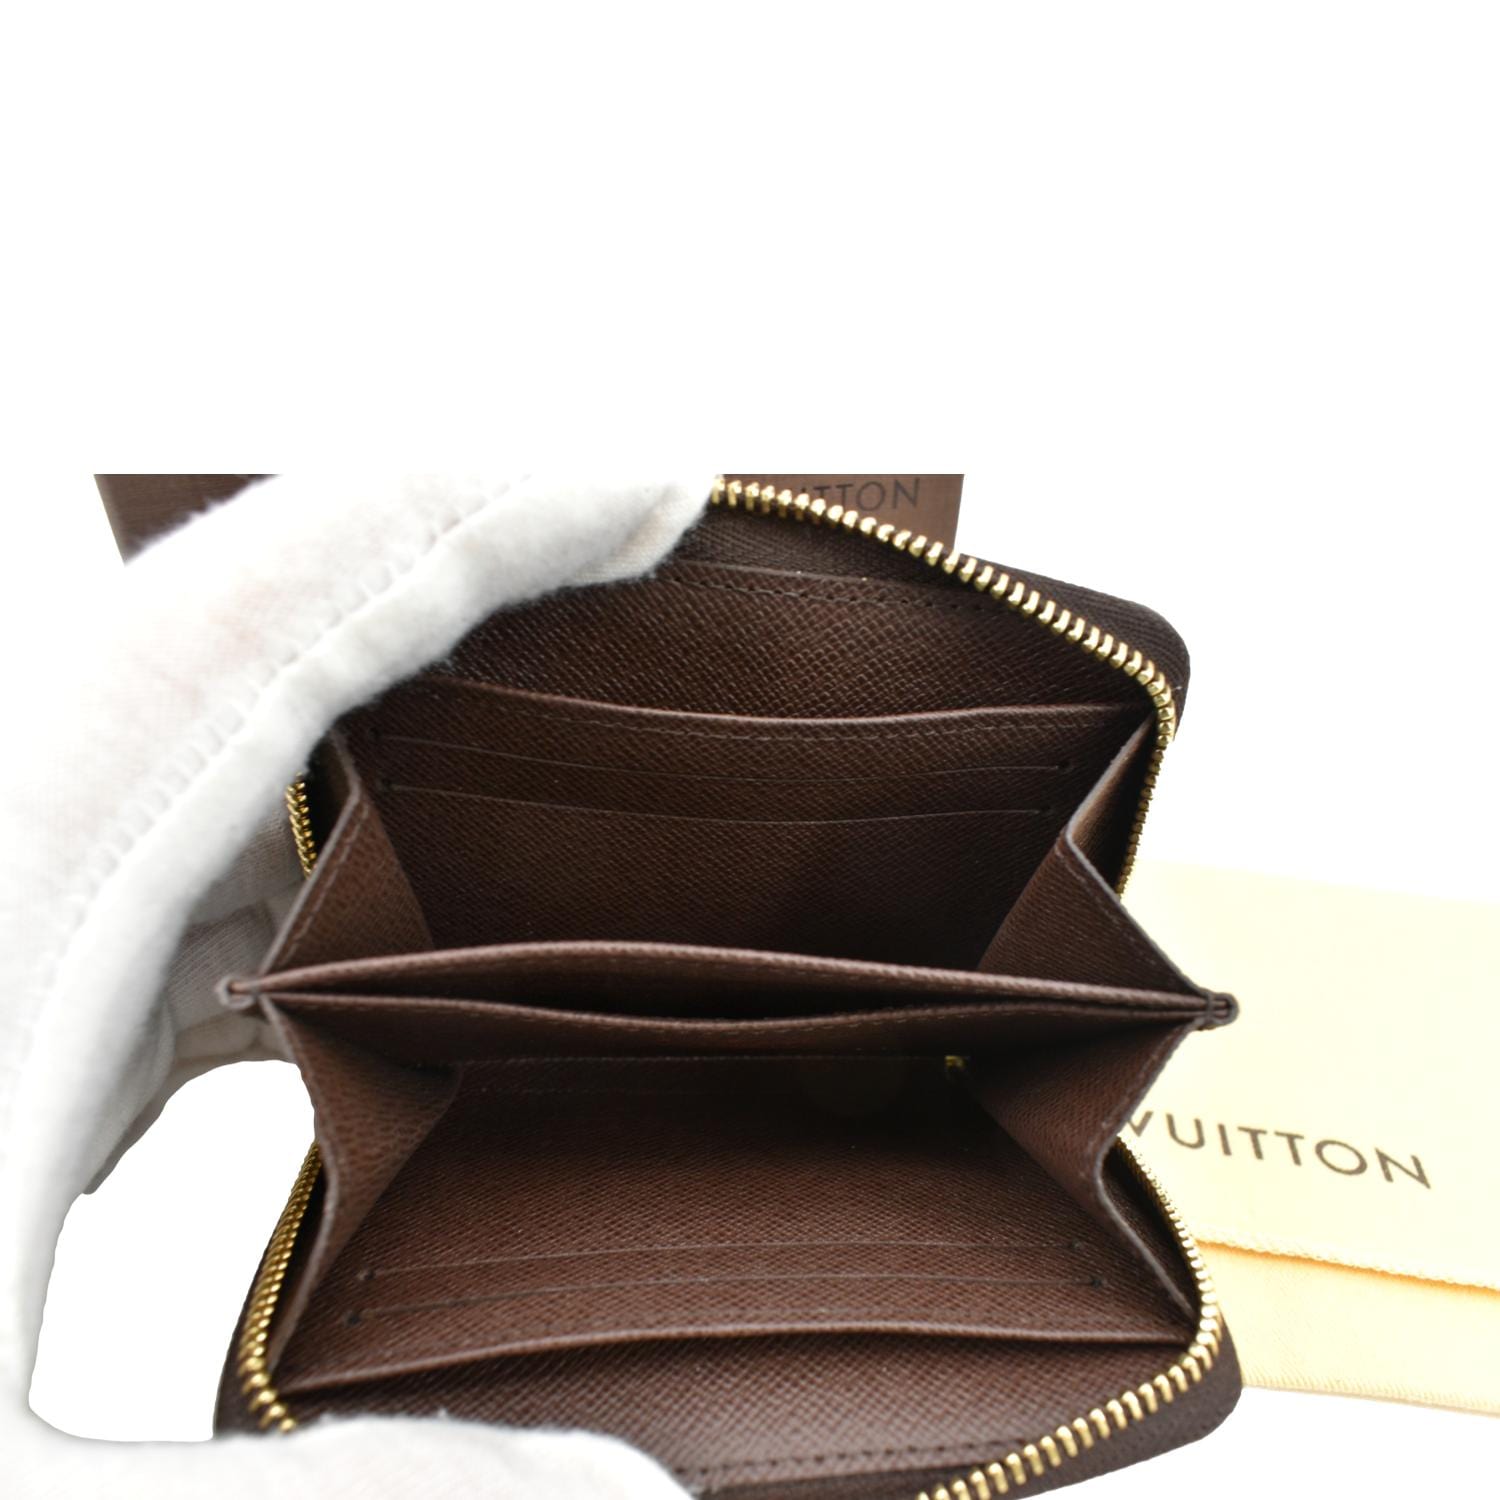 Products by Louis Vuitton: Zippy Coin Purse  Louis vuitton wallet zippy,  Coin purse, Purses